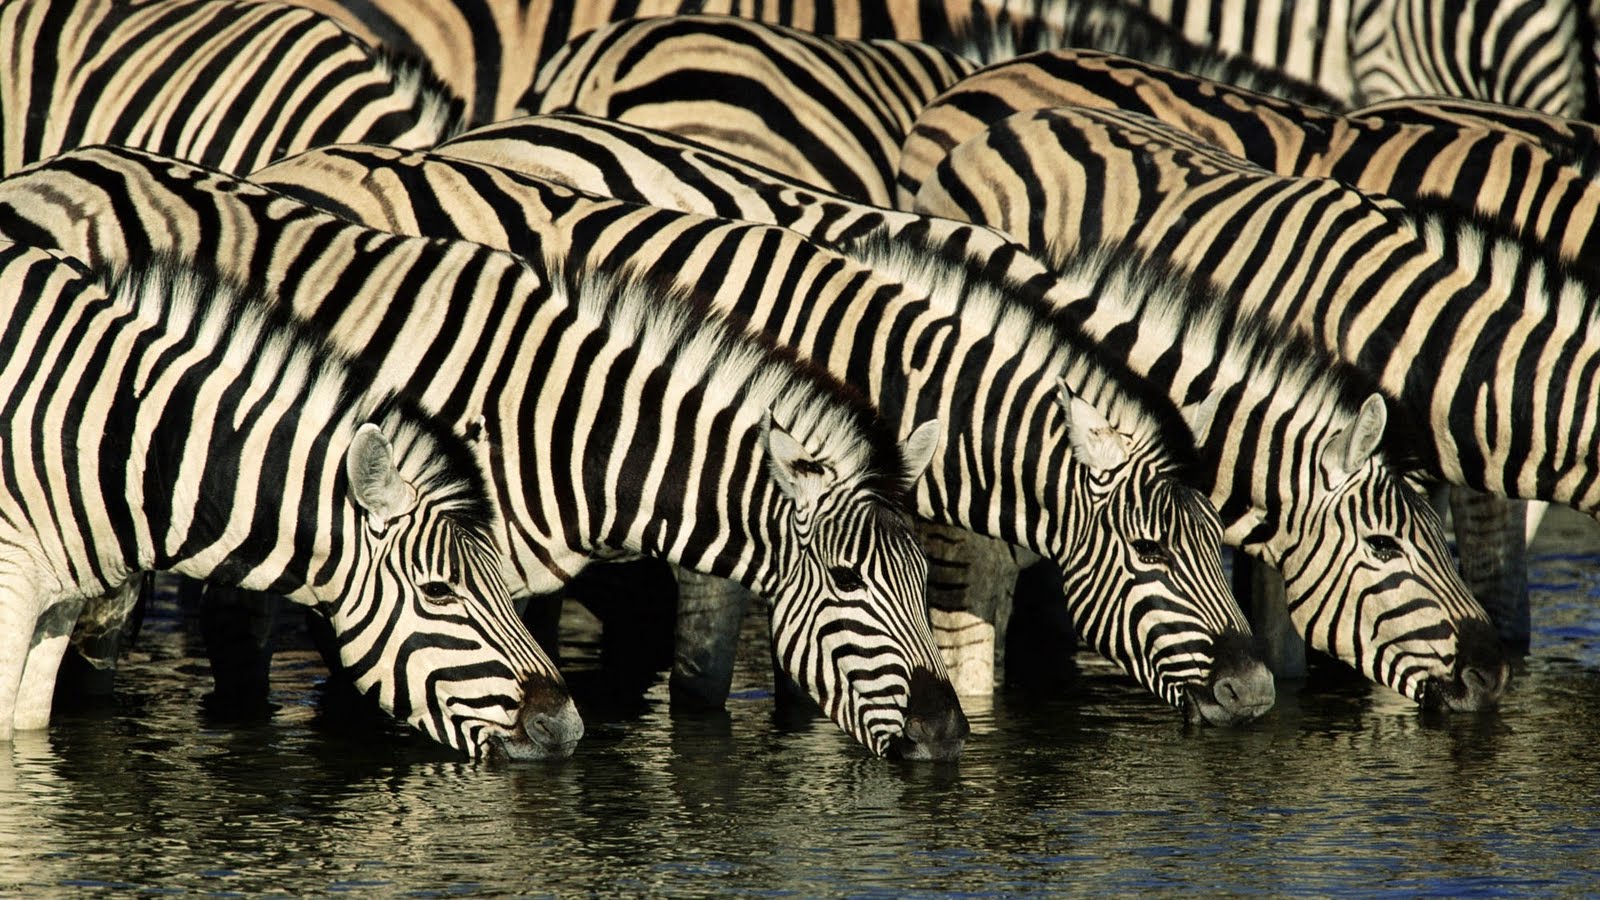 Zebra Wallpapers|Zebra Pictures | High Definition Wallpapers|Cool ...